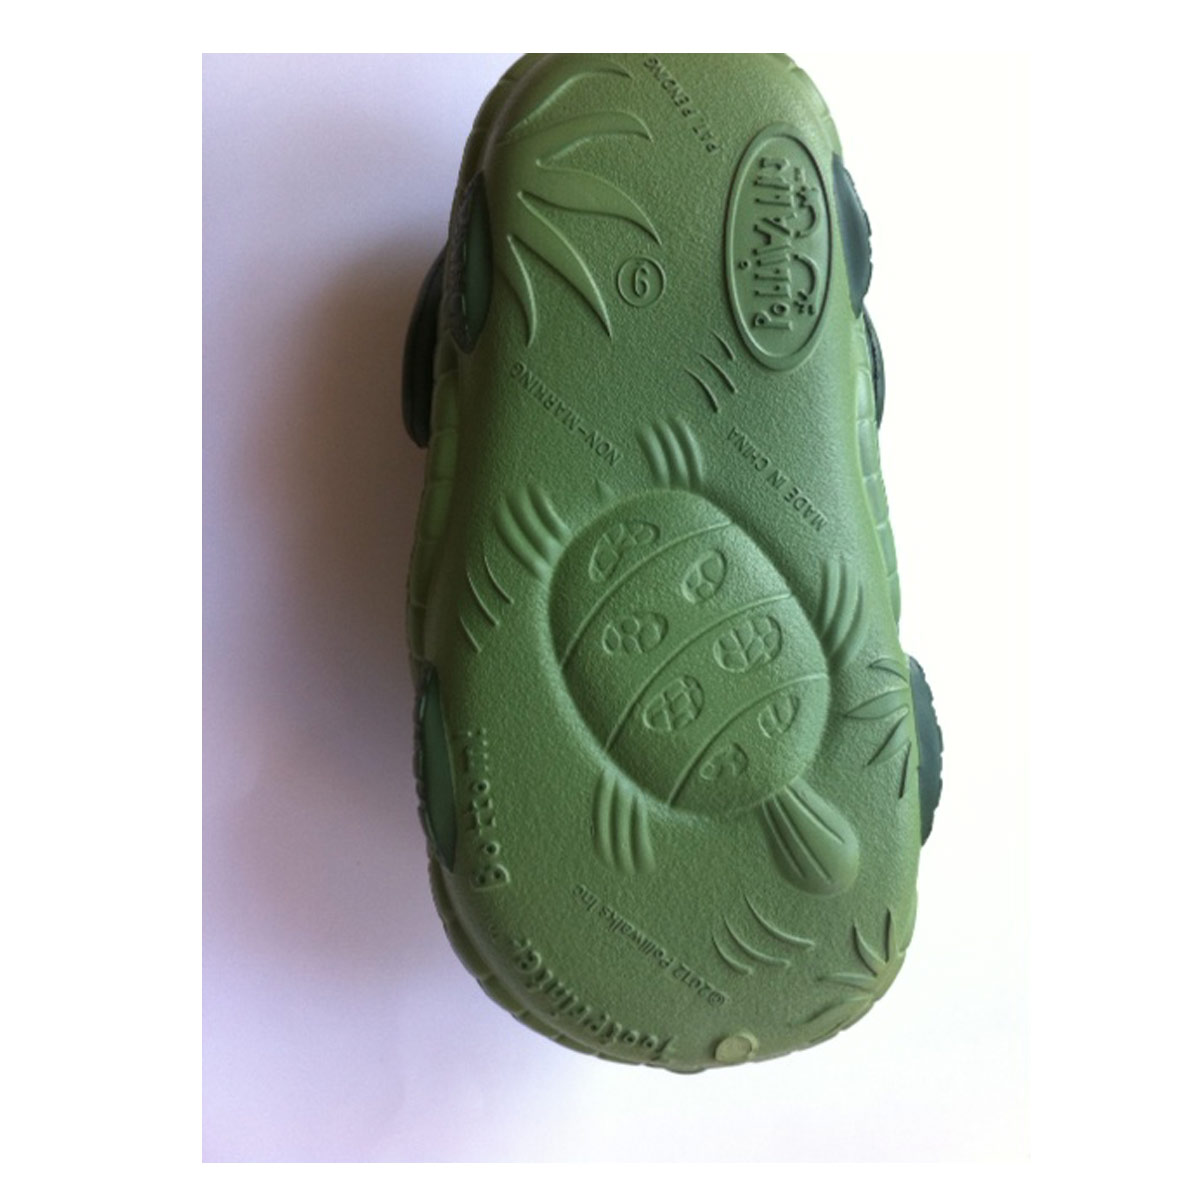 Polliwalks : Toddler shoes Timmy the Turtle Green # 7